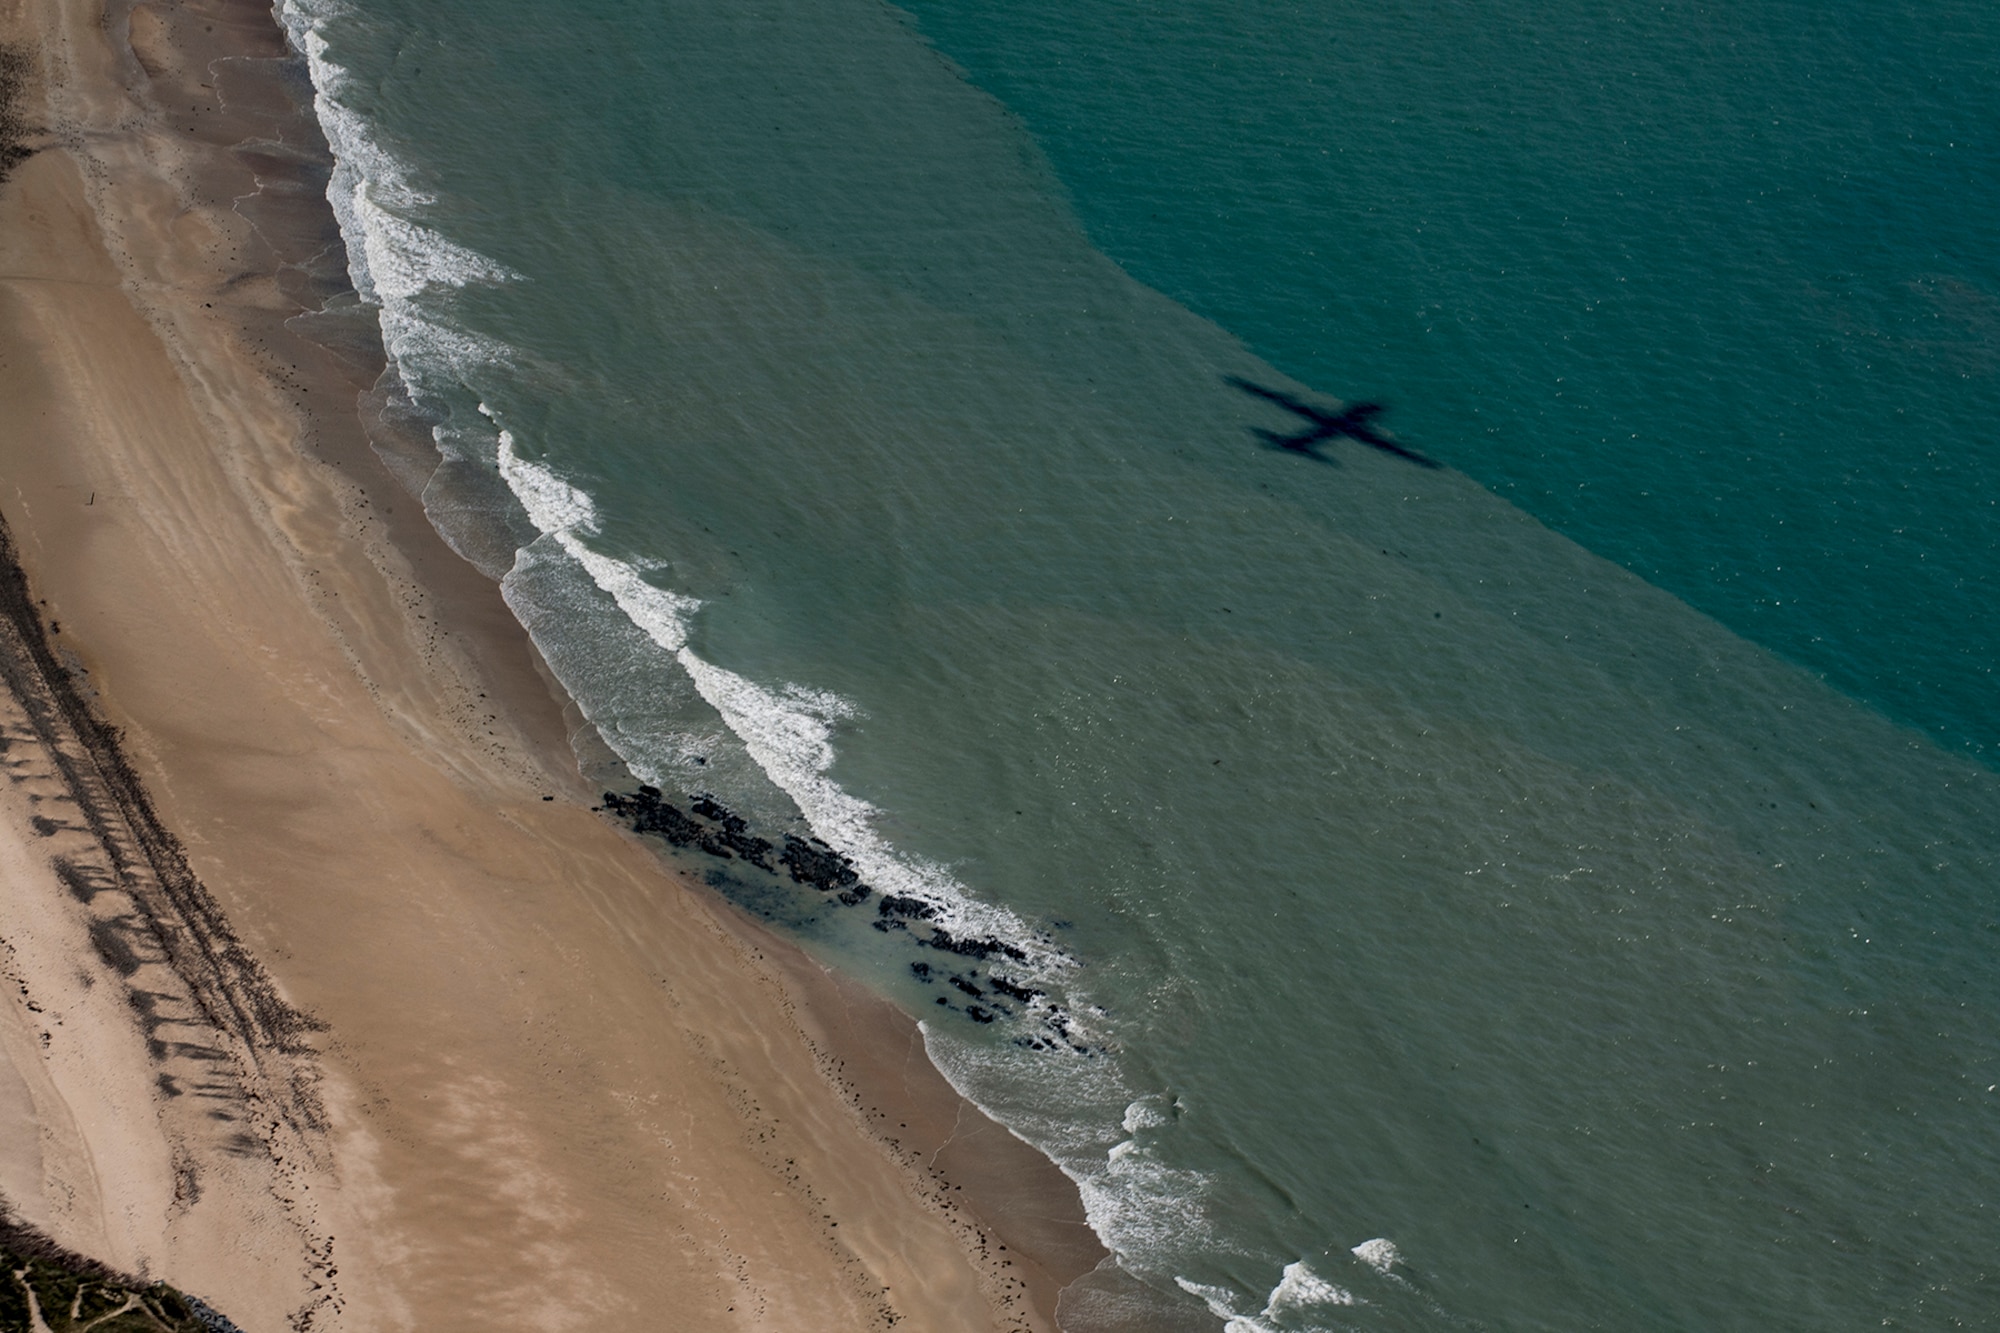 A U.S. Air Force C-130J Super Hercules assigned to the 37th Airlift Squadron at Ramstein Air Base, Germany, casts its shadow over the beaches of Normandy during a flyover in France, June 2, 2017. This event commemorates the 73rd anniversary of D-Day, the largest multinational amphibious landing and operational military airdrop in history, and highlights the U.S.' steadfast commitment to European allies and partners. Overall, approximately 400 U.S. service members from units in Europe and the U.S. are participating in ceremonial D-Day 73 events from May 31-June 7, 2017. (U.S. Air Force photo by Senior Airman Devin Boyer)